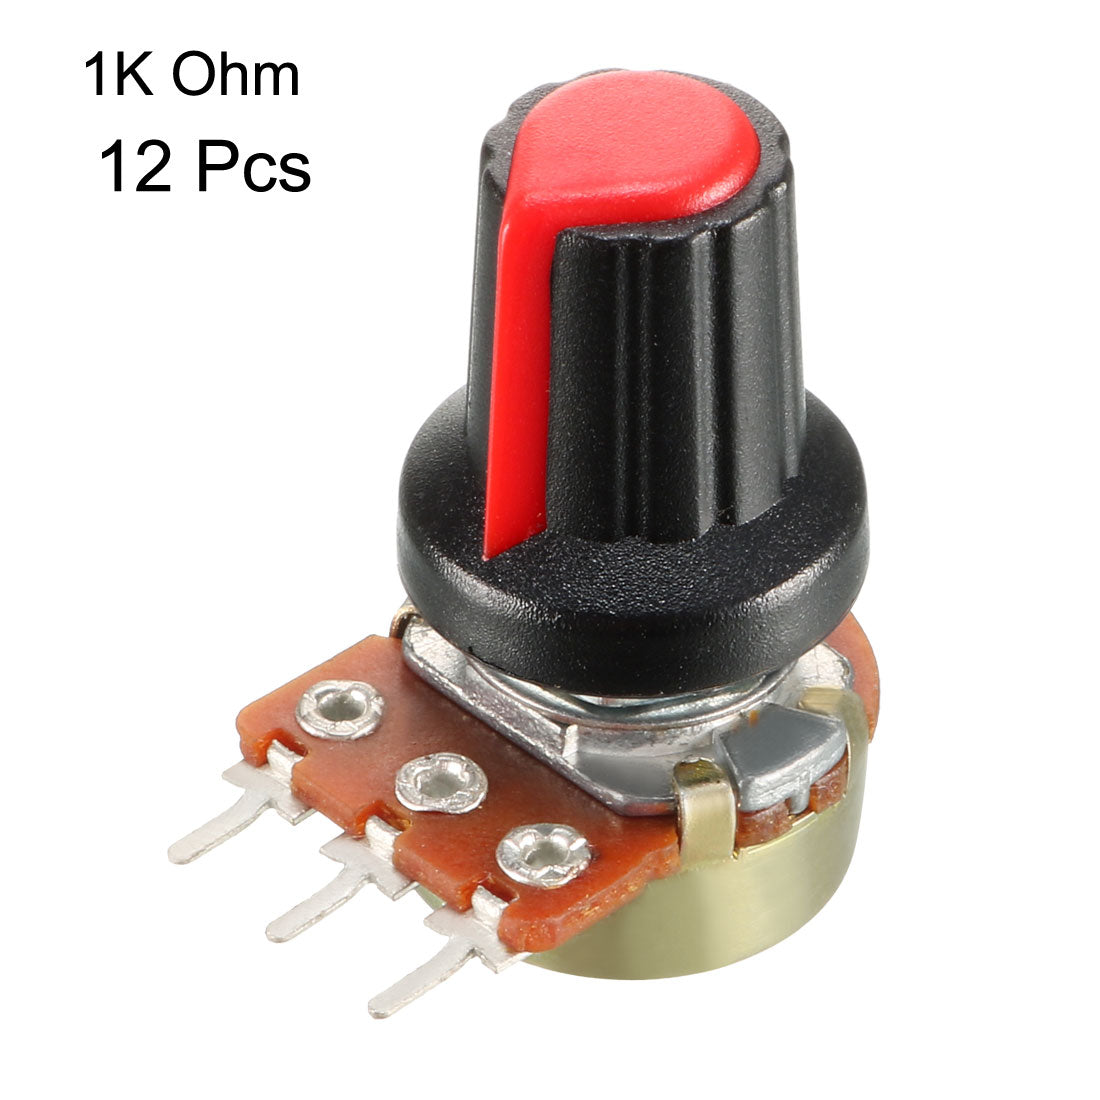 uxcell Uxcell 12Pcs 1K Ohm Variable Resistors Single Turn Rotary Carbon Film Taper Potentiometer with Knobs